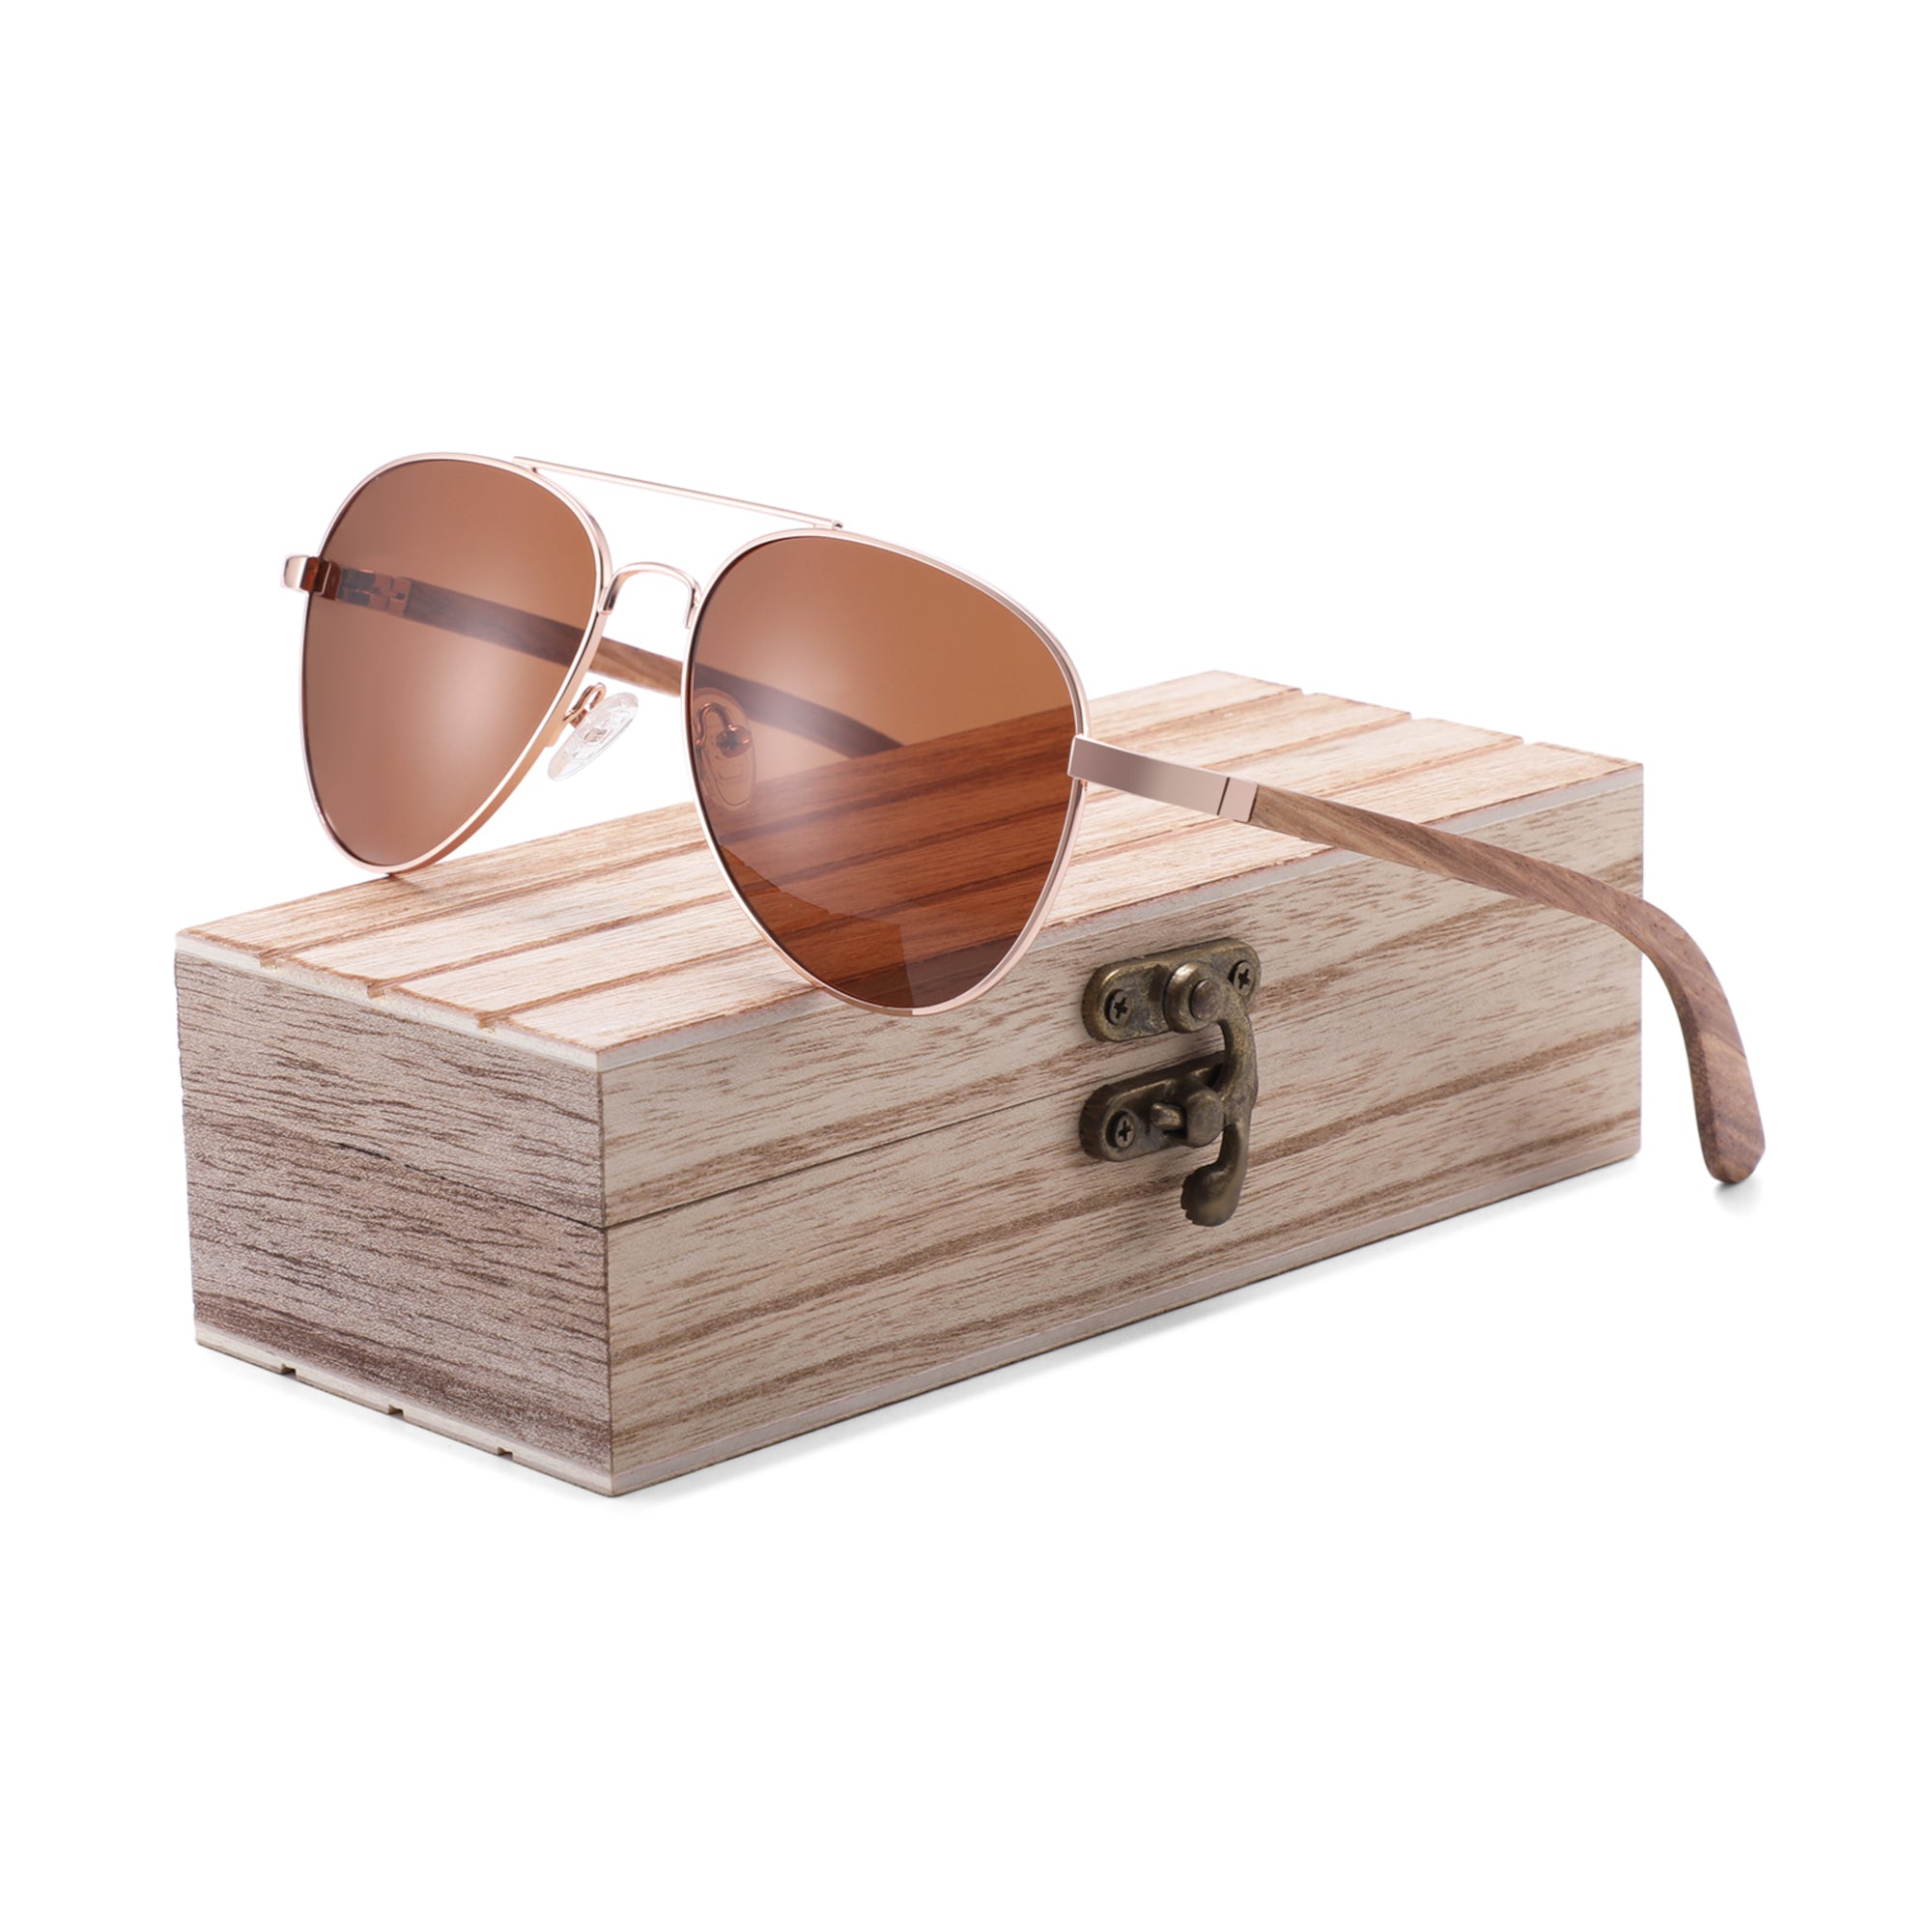 Real Zebra Wood Silver Framed Classic Aviator Sunglasses by WUDN